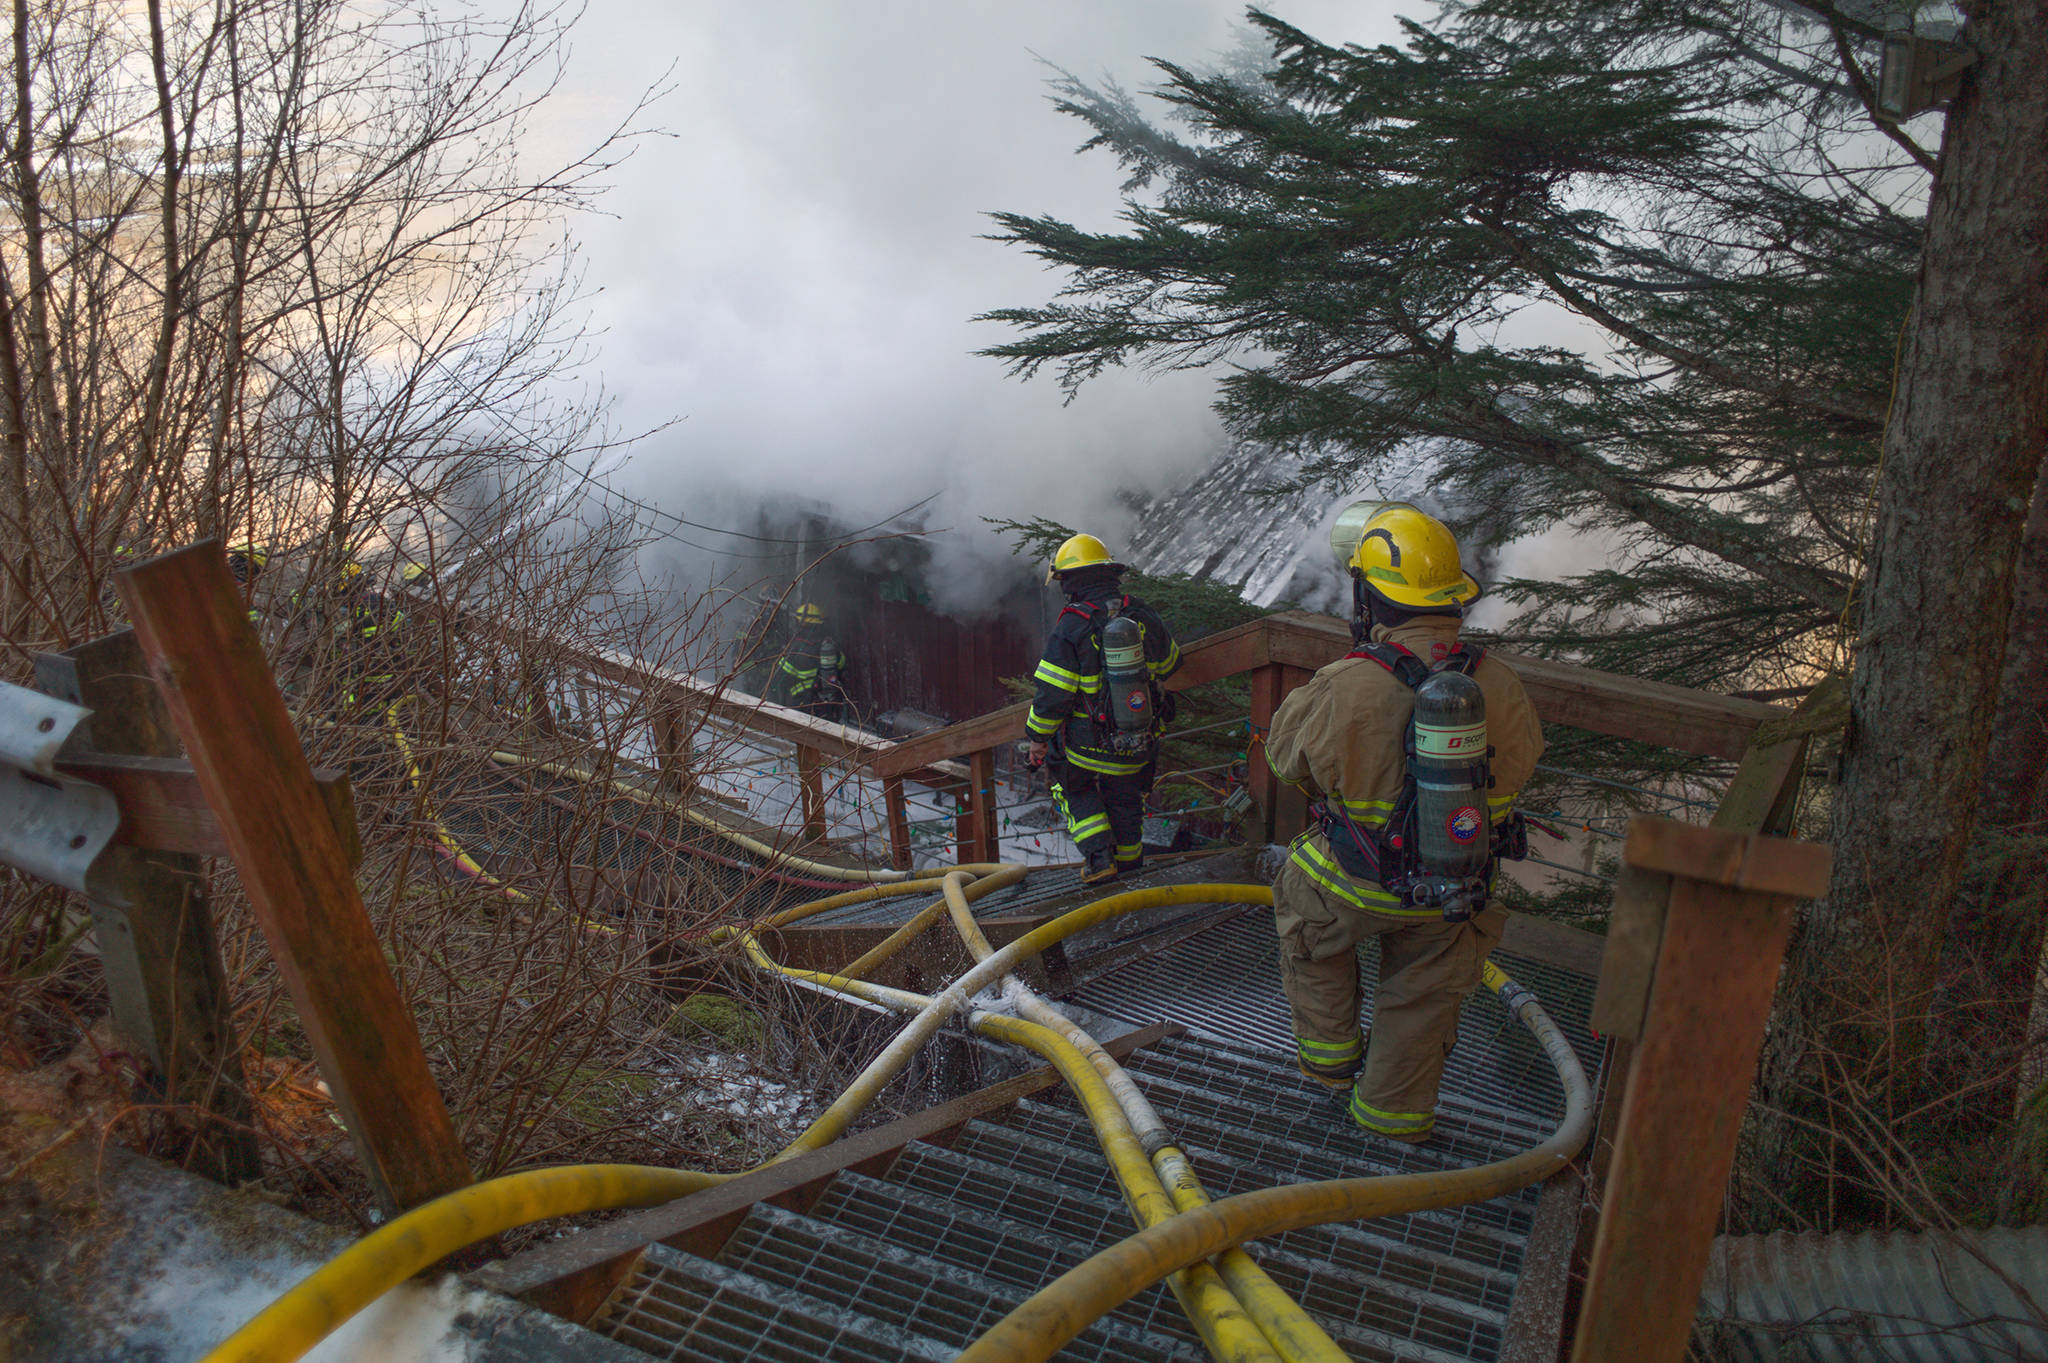 Firefighters work the scene of a house fire on North Douglas Highway on Thursday, March 28, 2019. (Michael Penn | Juneau Empire)